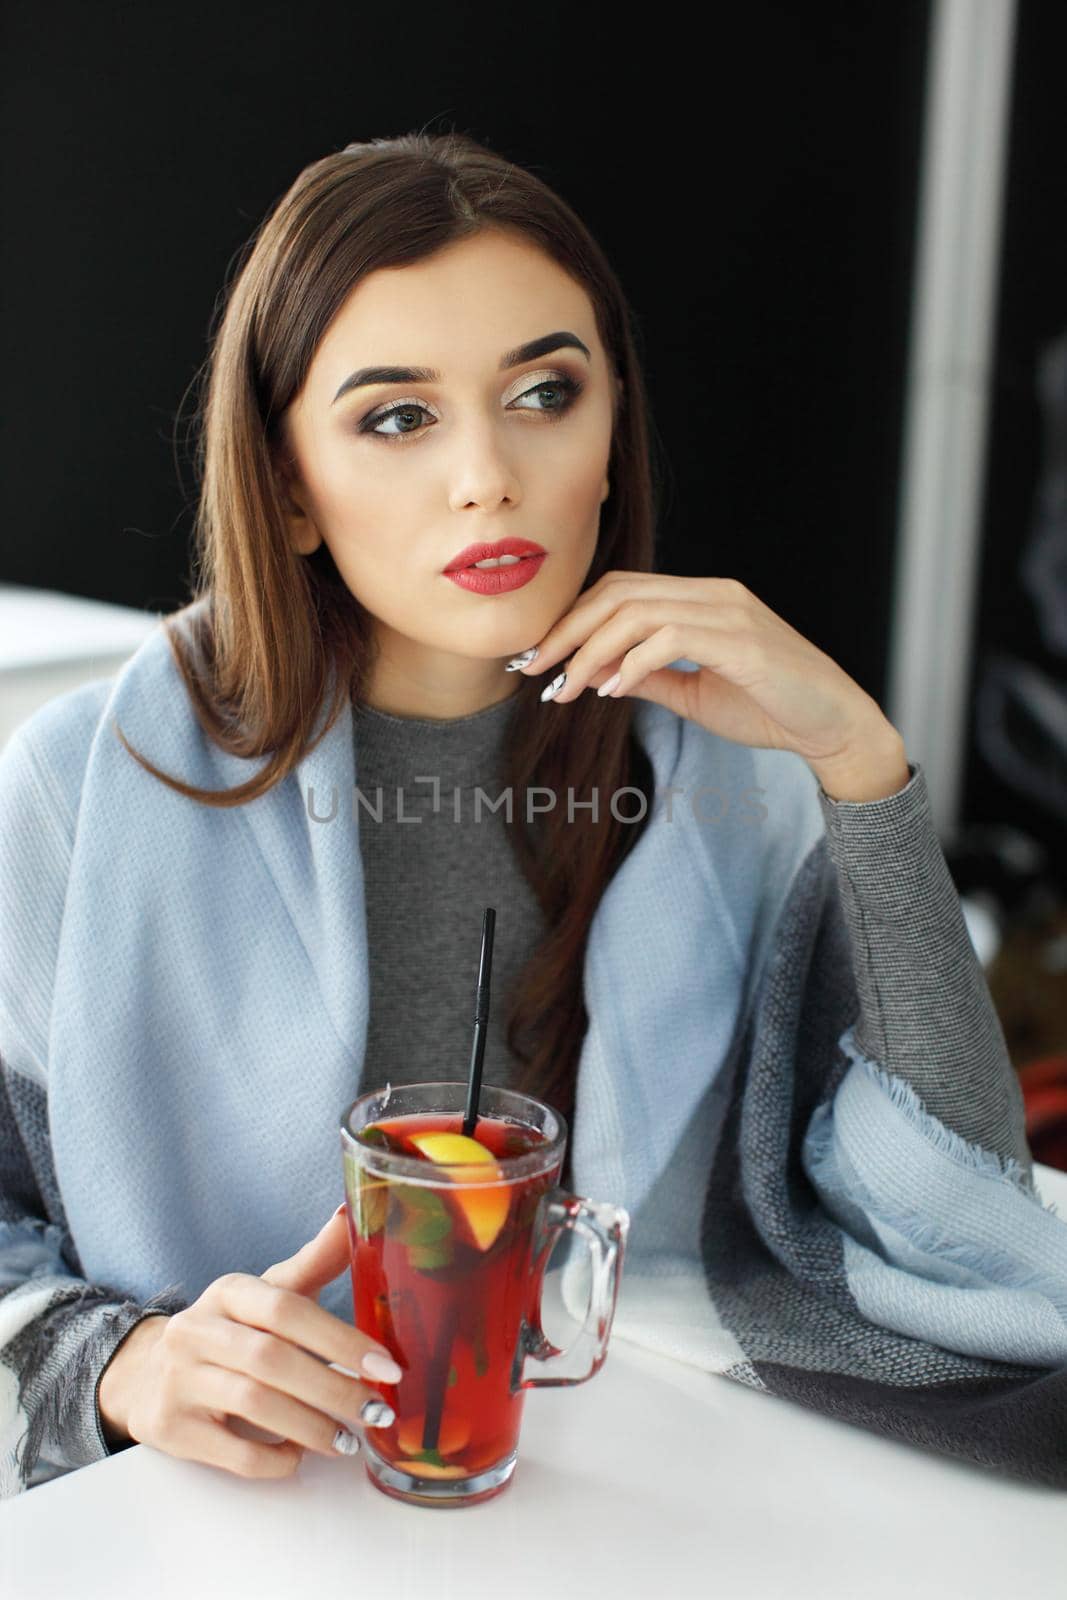 young woman holding a cup of hot mint tea or hot lemonade